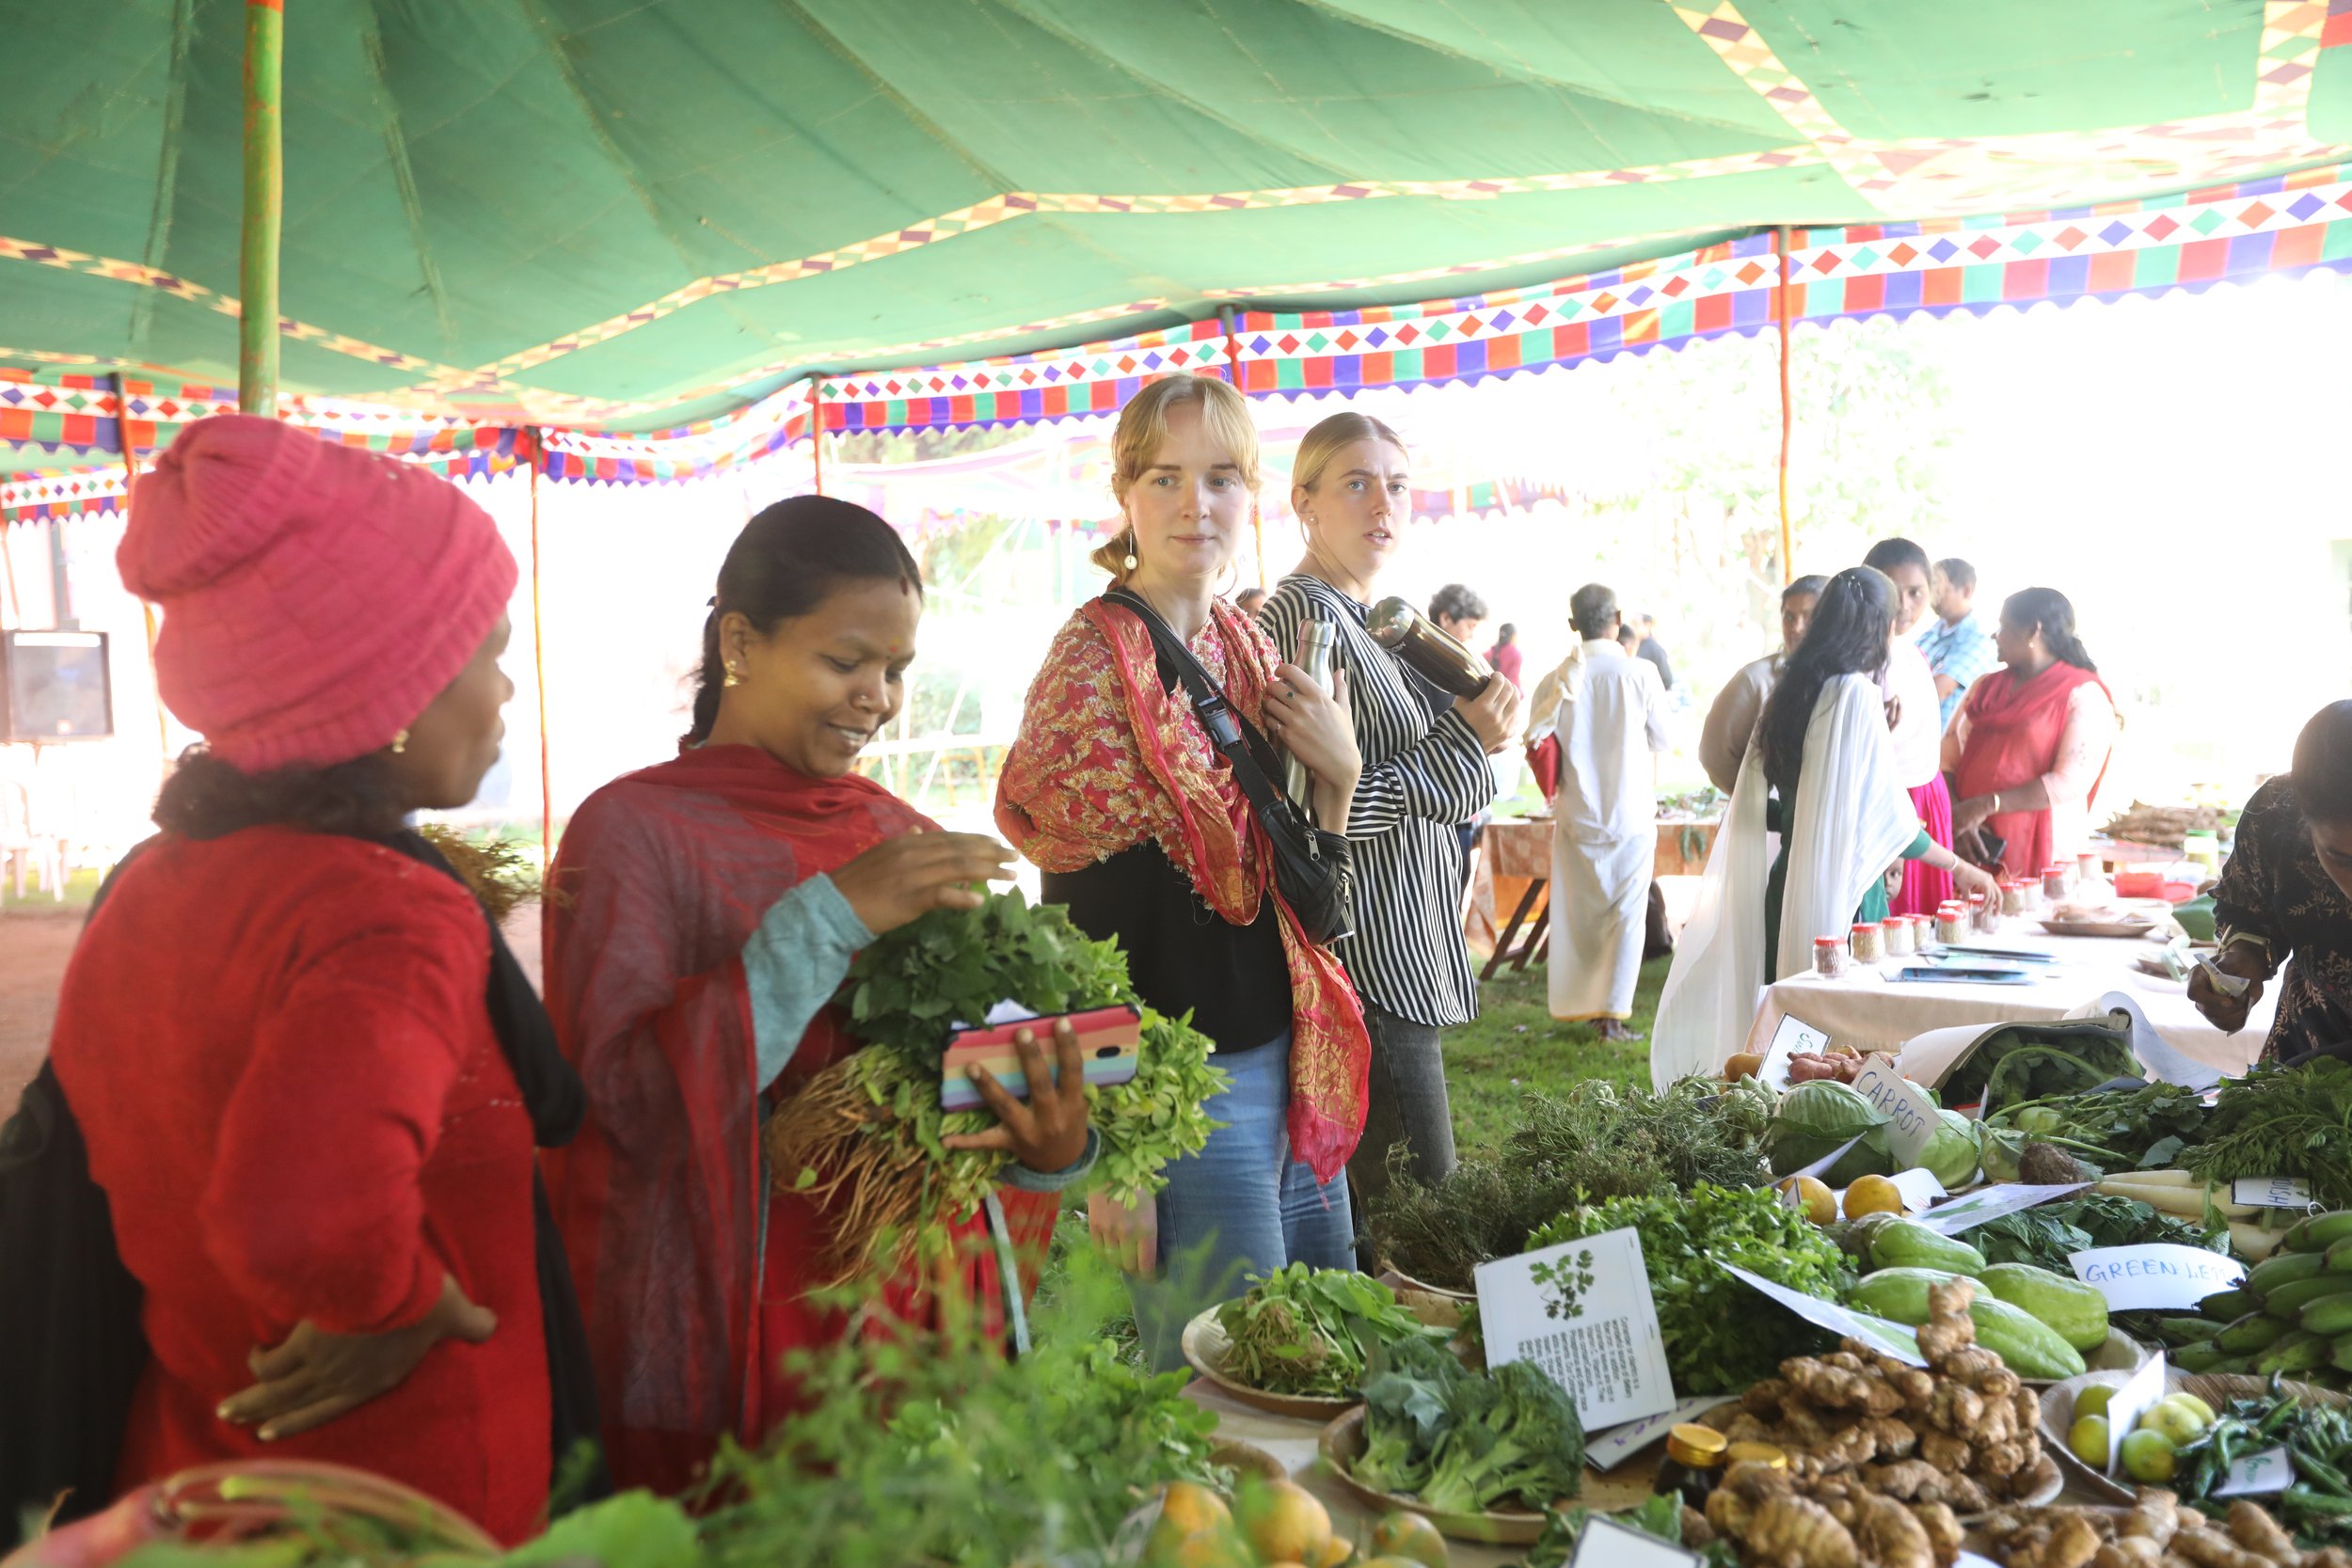 Local Wild foods display at The Habba 2022 3.JPG